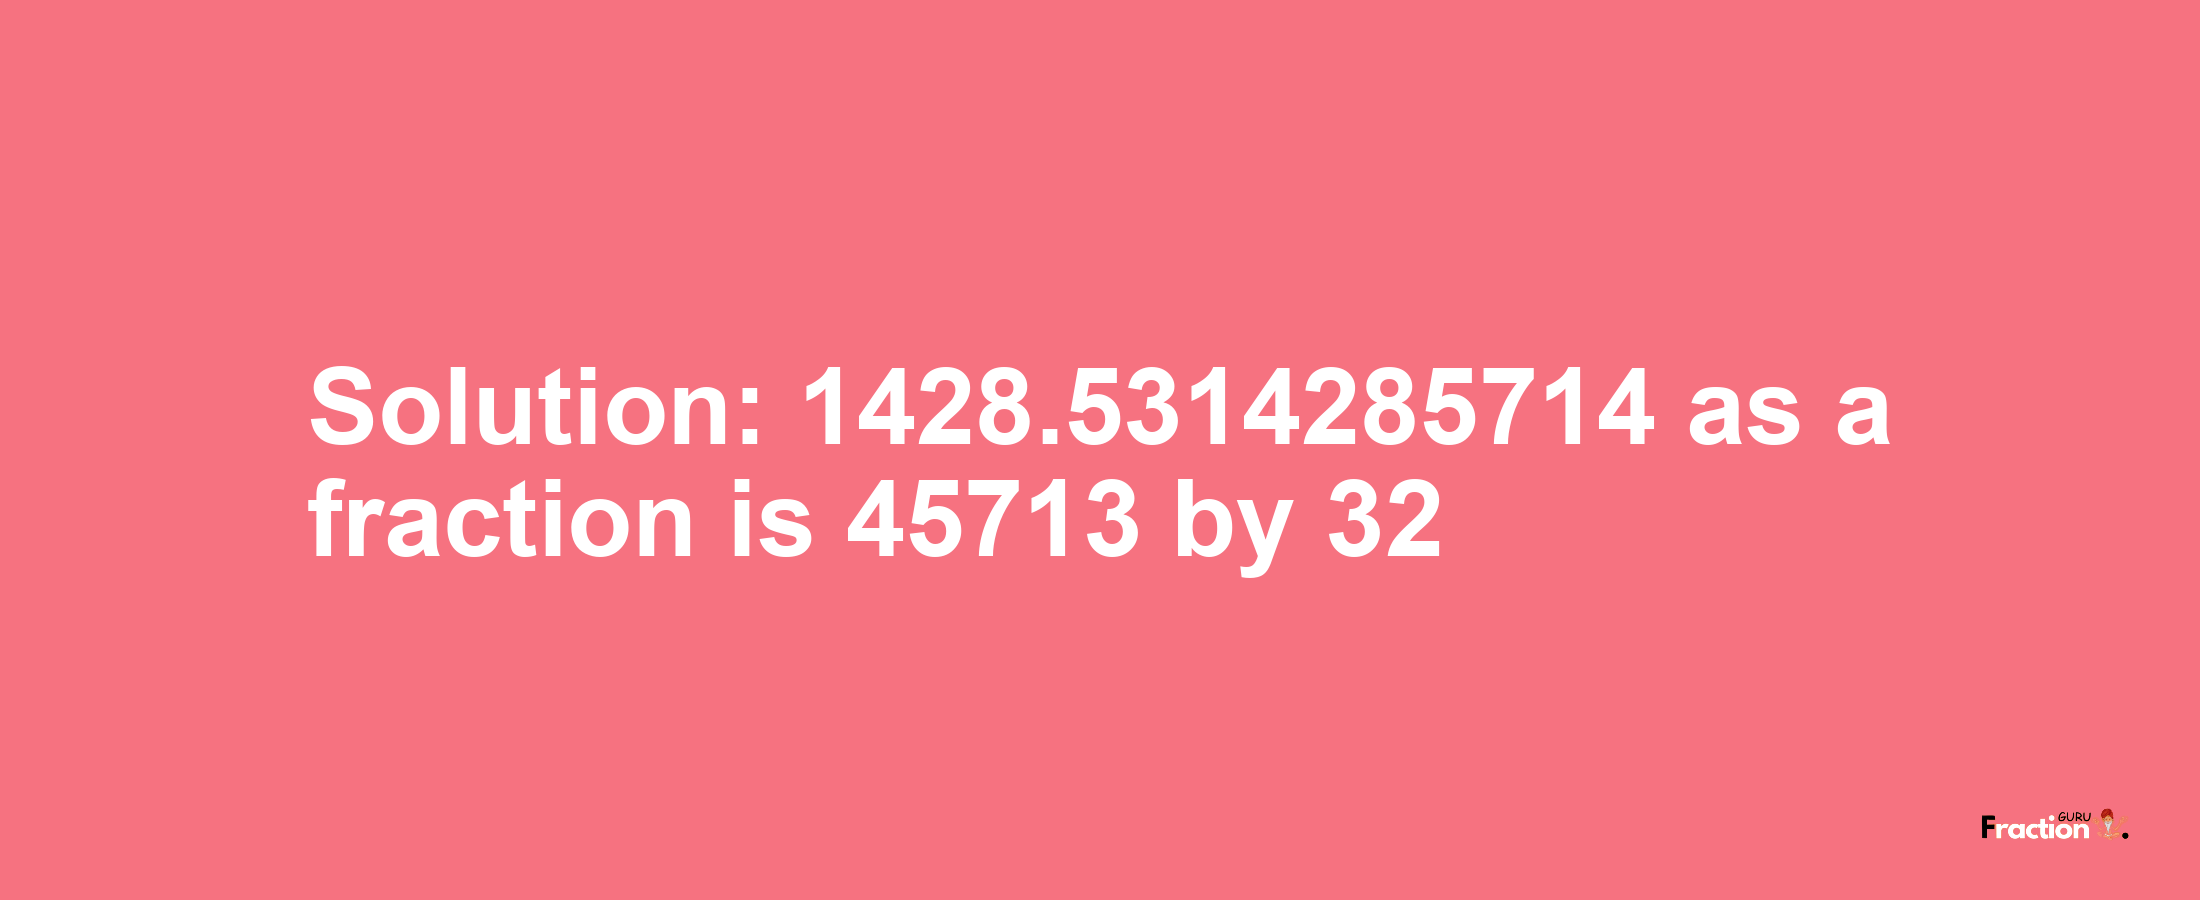 Solution:1428.5314285714 as a fraction is 45713/32